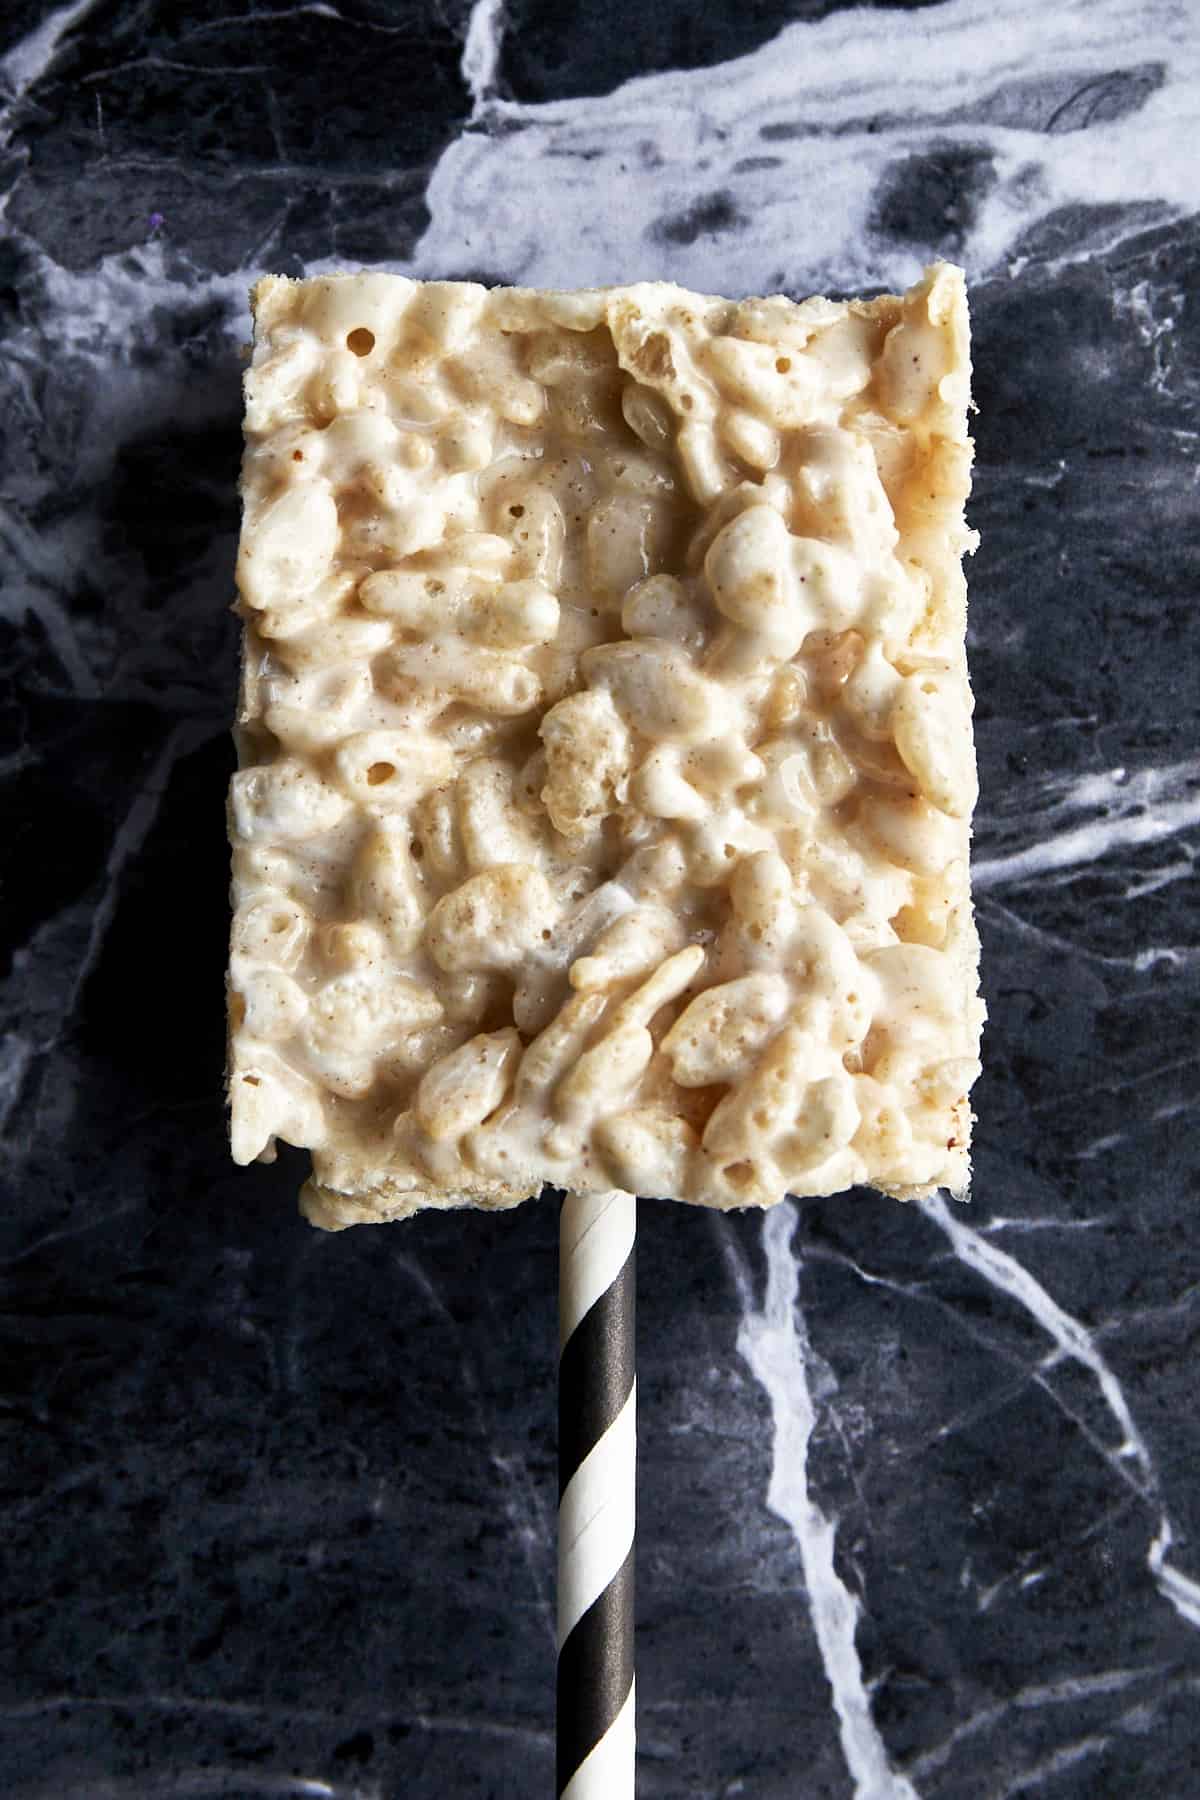 A plain rice krispie treat with a straw sticking out. 